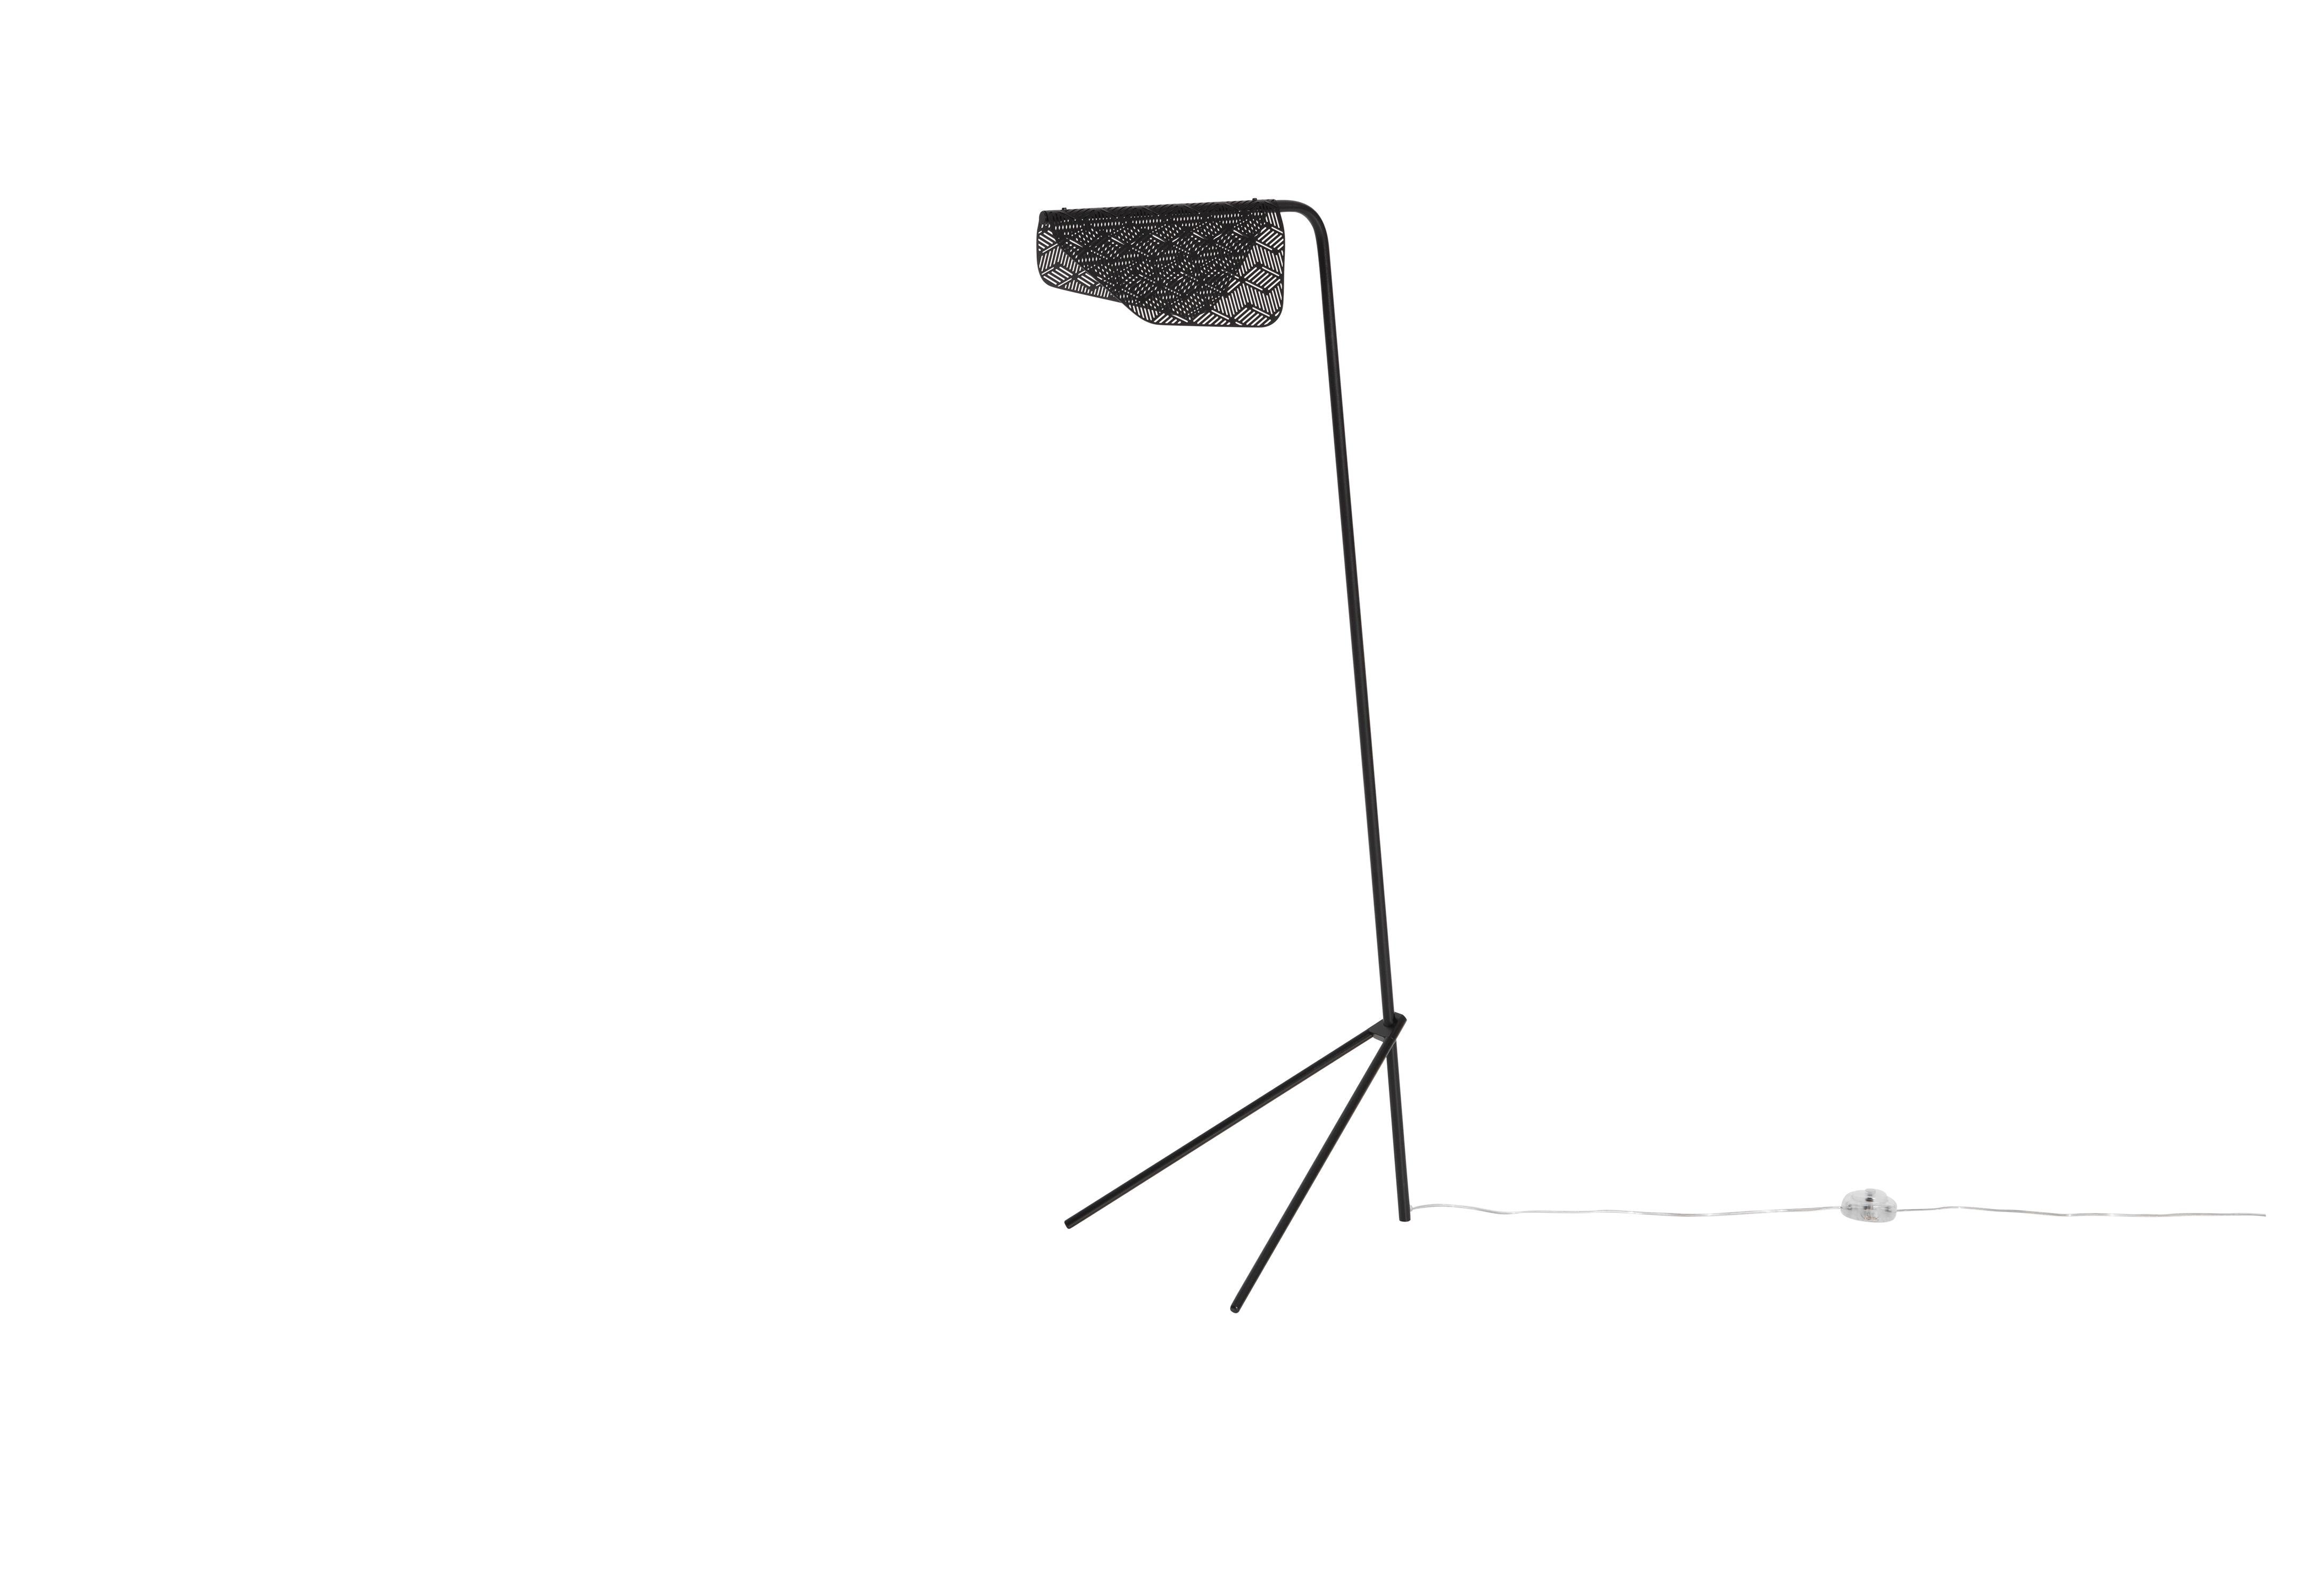 French Petite Friture Mediterranea Floor Lamp in Black by Noé Duchaufour-Lawrance, 2016 For Sale